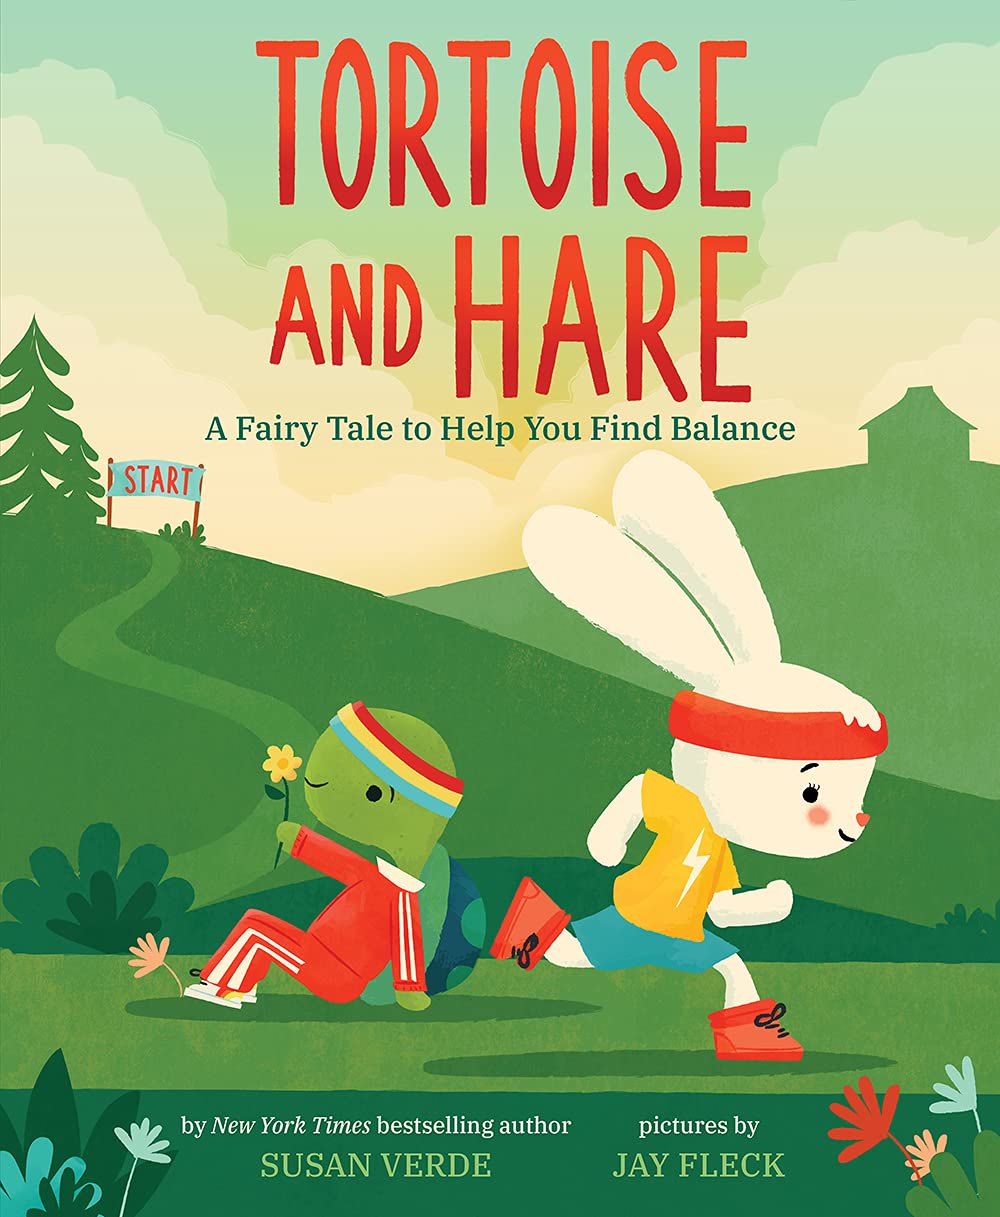 Image for "Tortoise and Hare: A Fairy Tale to Help You Find Balance"